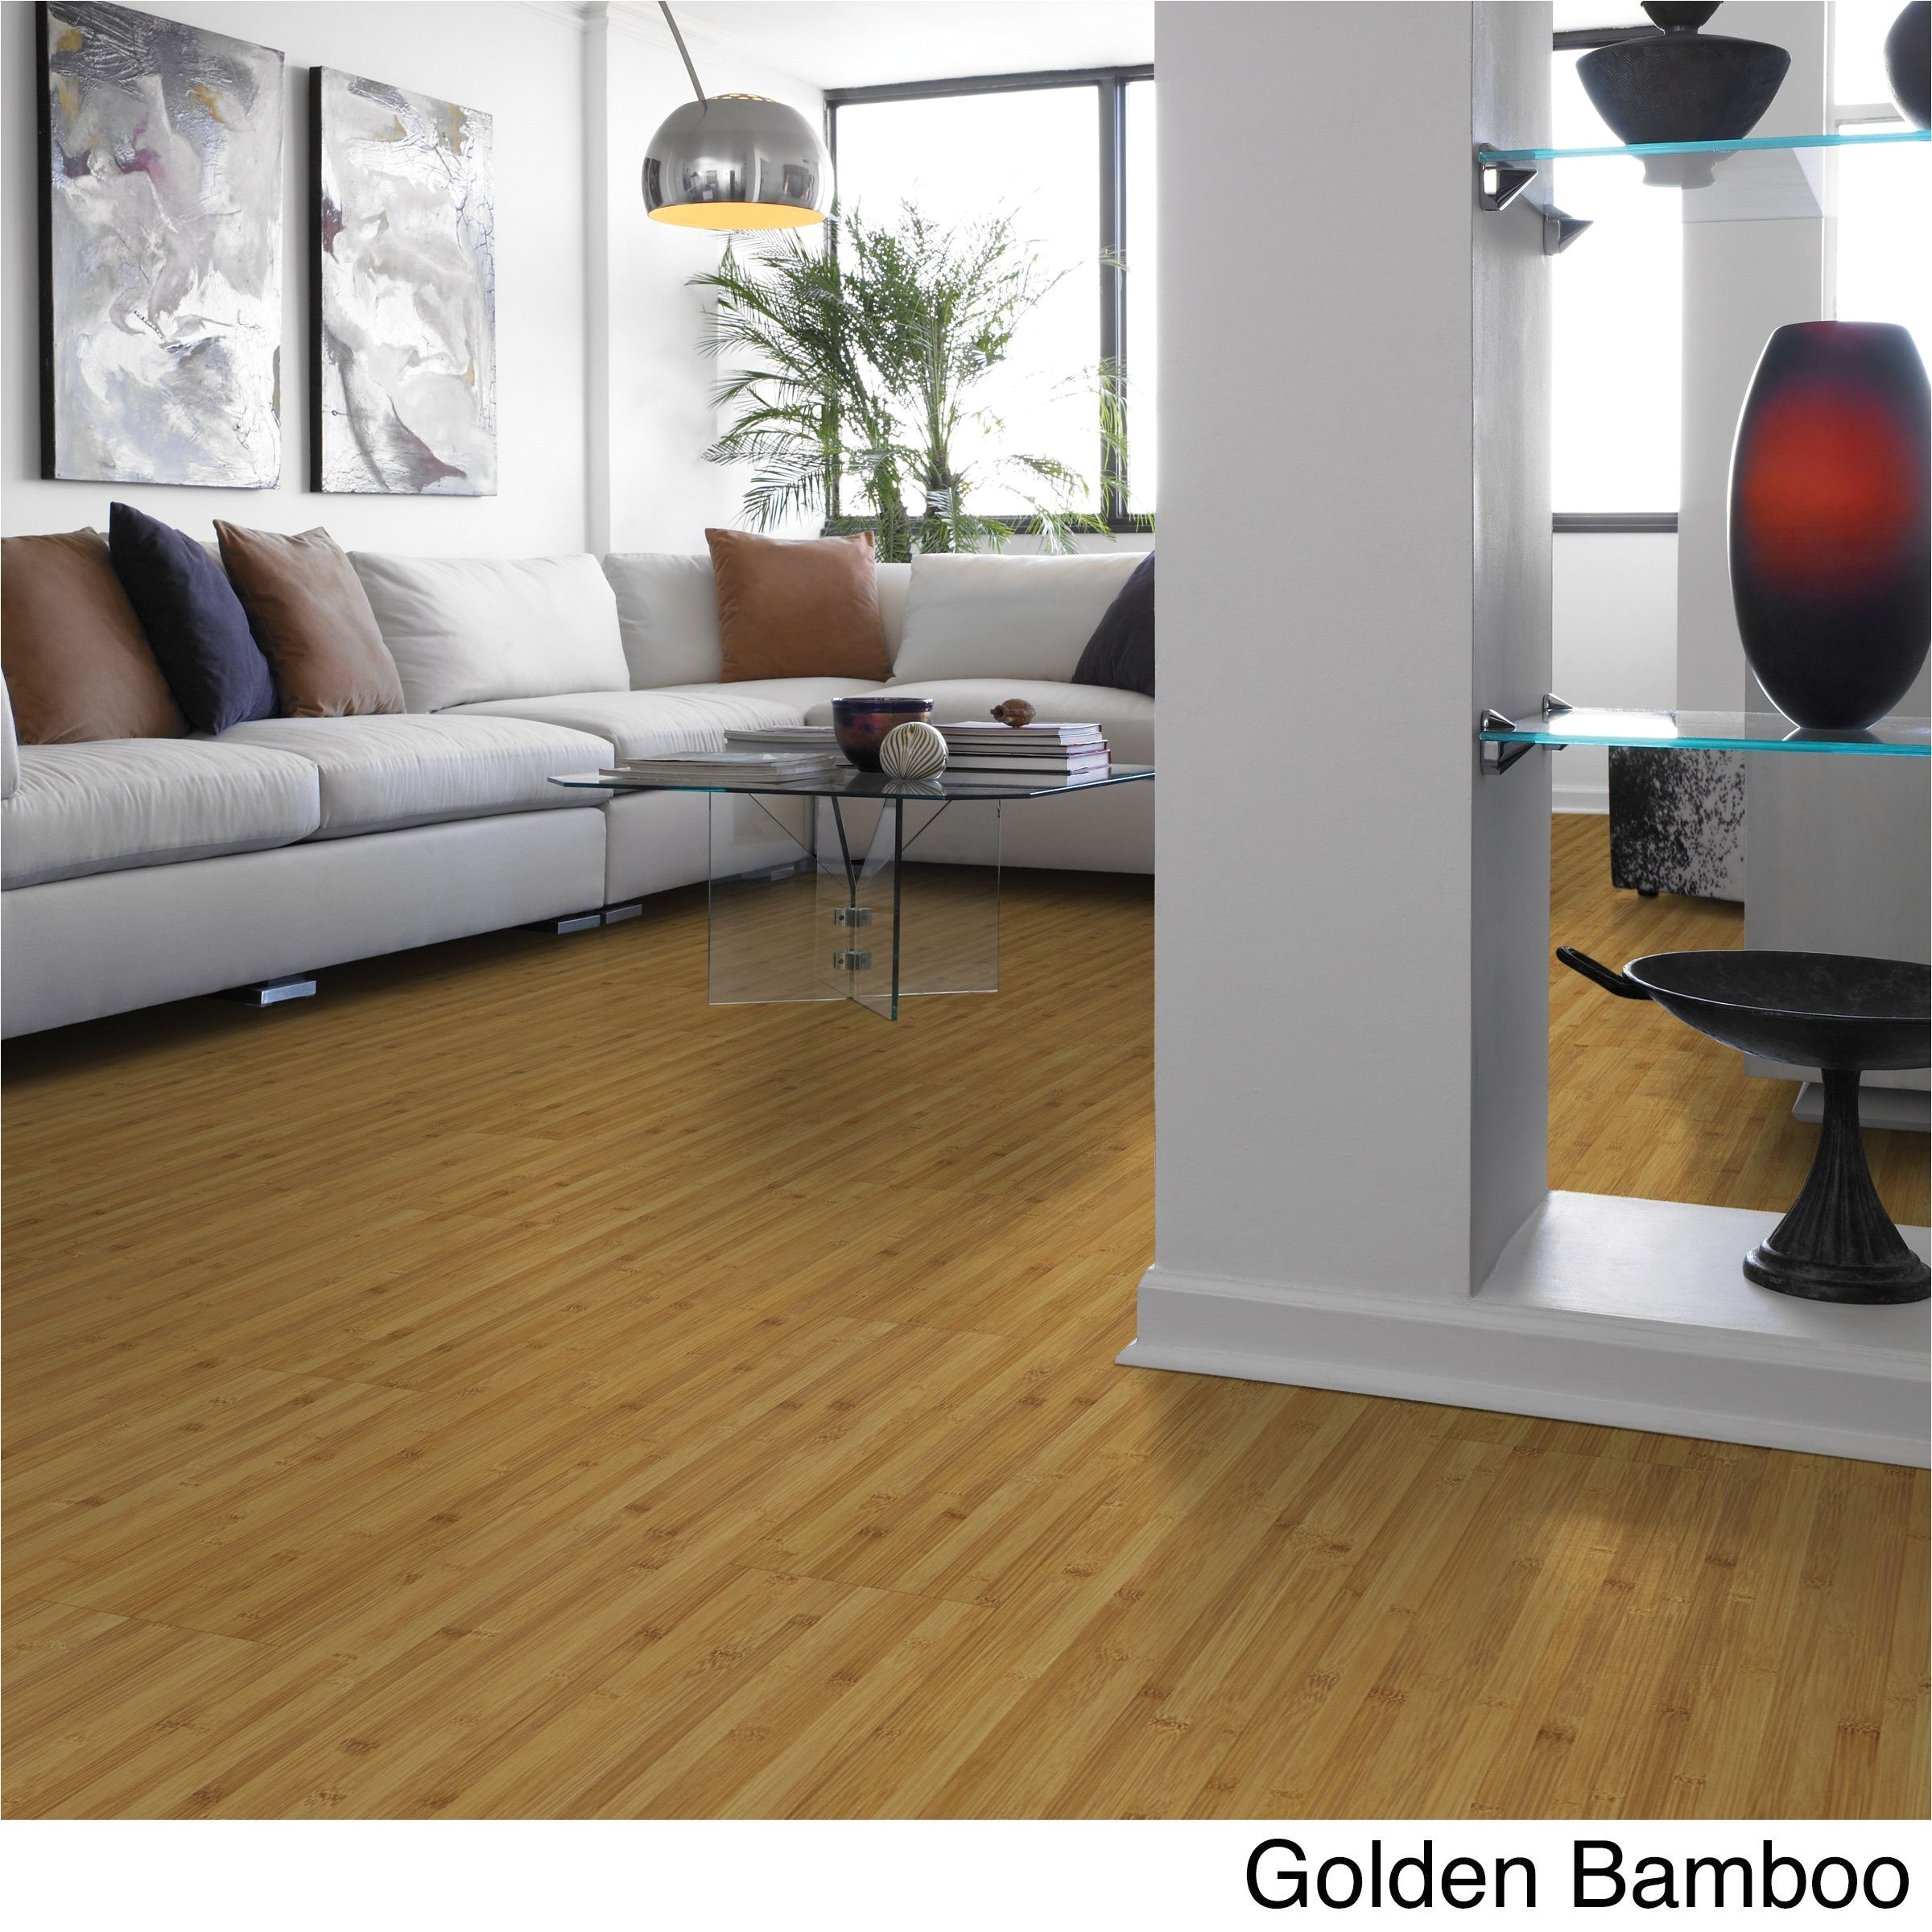 18 Lovely What is Bamboo Hardwood Flooring 2024 free download what is bamboo hardwood flooring of bamboo flooring and dogs urine bamboo flooring pros and cons home pertaining to bamboo flooring and dogs urine bamboo flooring pros and cons home design